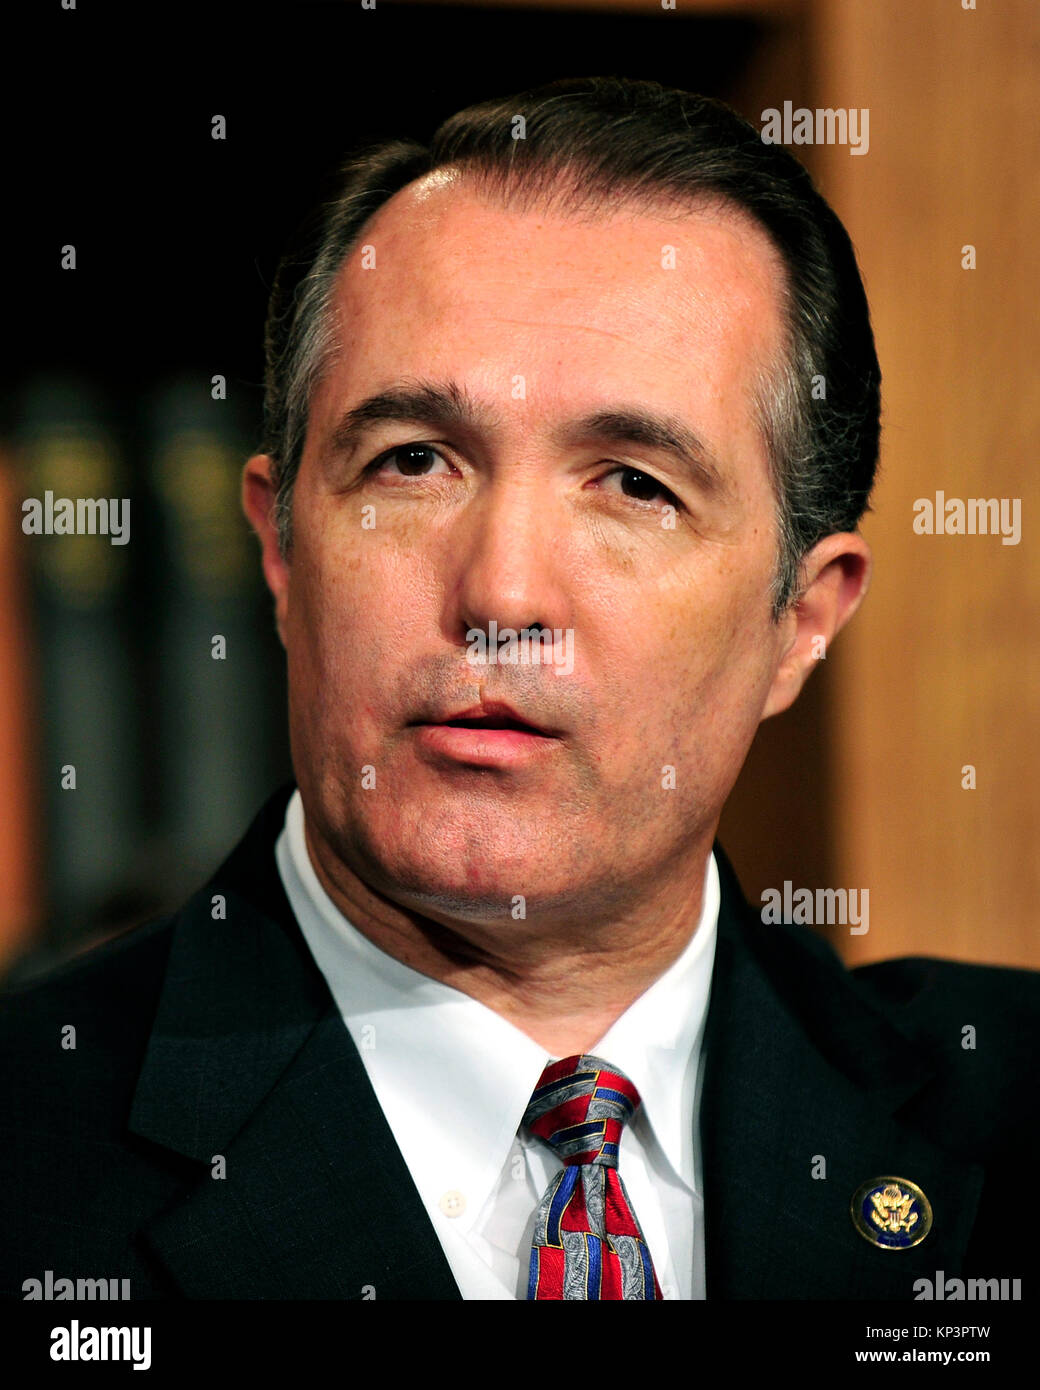 United States Representative Trent Franks (Republican of Arizona) announces his opposition to the health care reform bill, in spite of the executive order issued by U.S. President Barack Obama that preserves the existing ban on federal funding of abortion, in the U.S. Capitol in Washington, DC on Sunday, March 21, 2010. Franks announced his resignation from the House on December 7, 2017 as the US House Ethics Committee investigated his asking two female staffers about surrogate motherhood. Credit: Ron Sachs/CNP - NO WIRE SERVICE - Photo: Ron Sachs/Consolidated/dpa Stock Photo